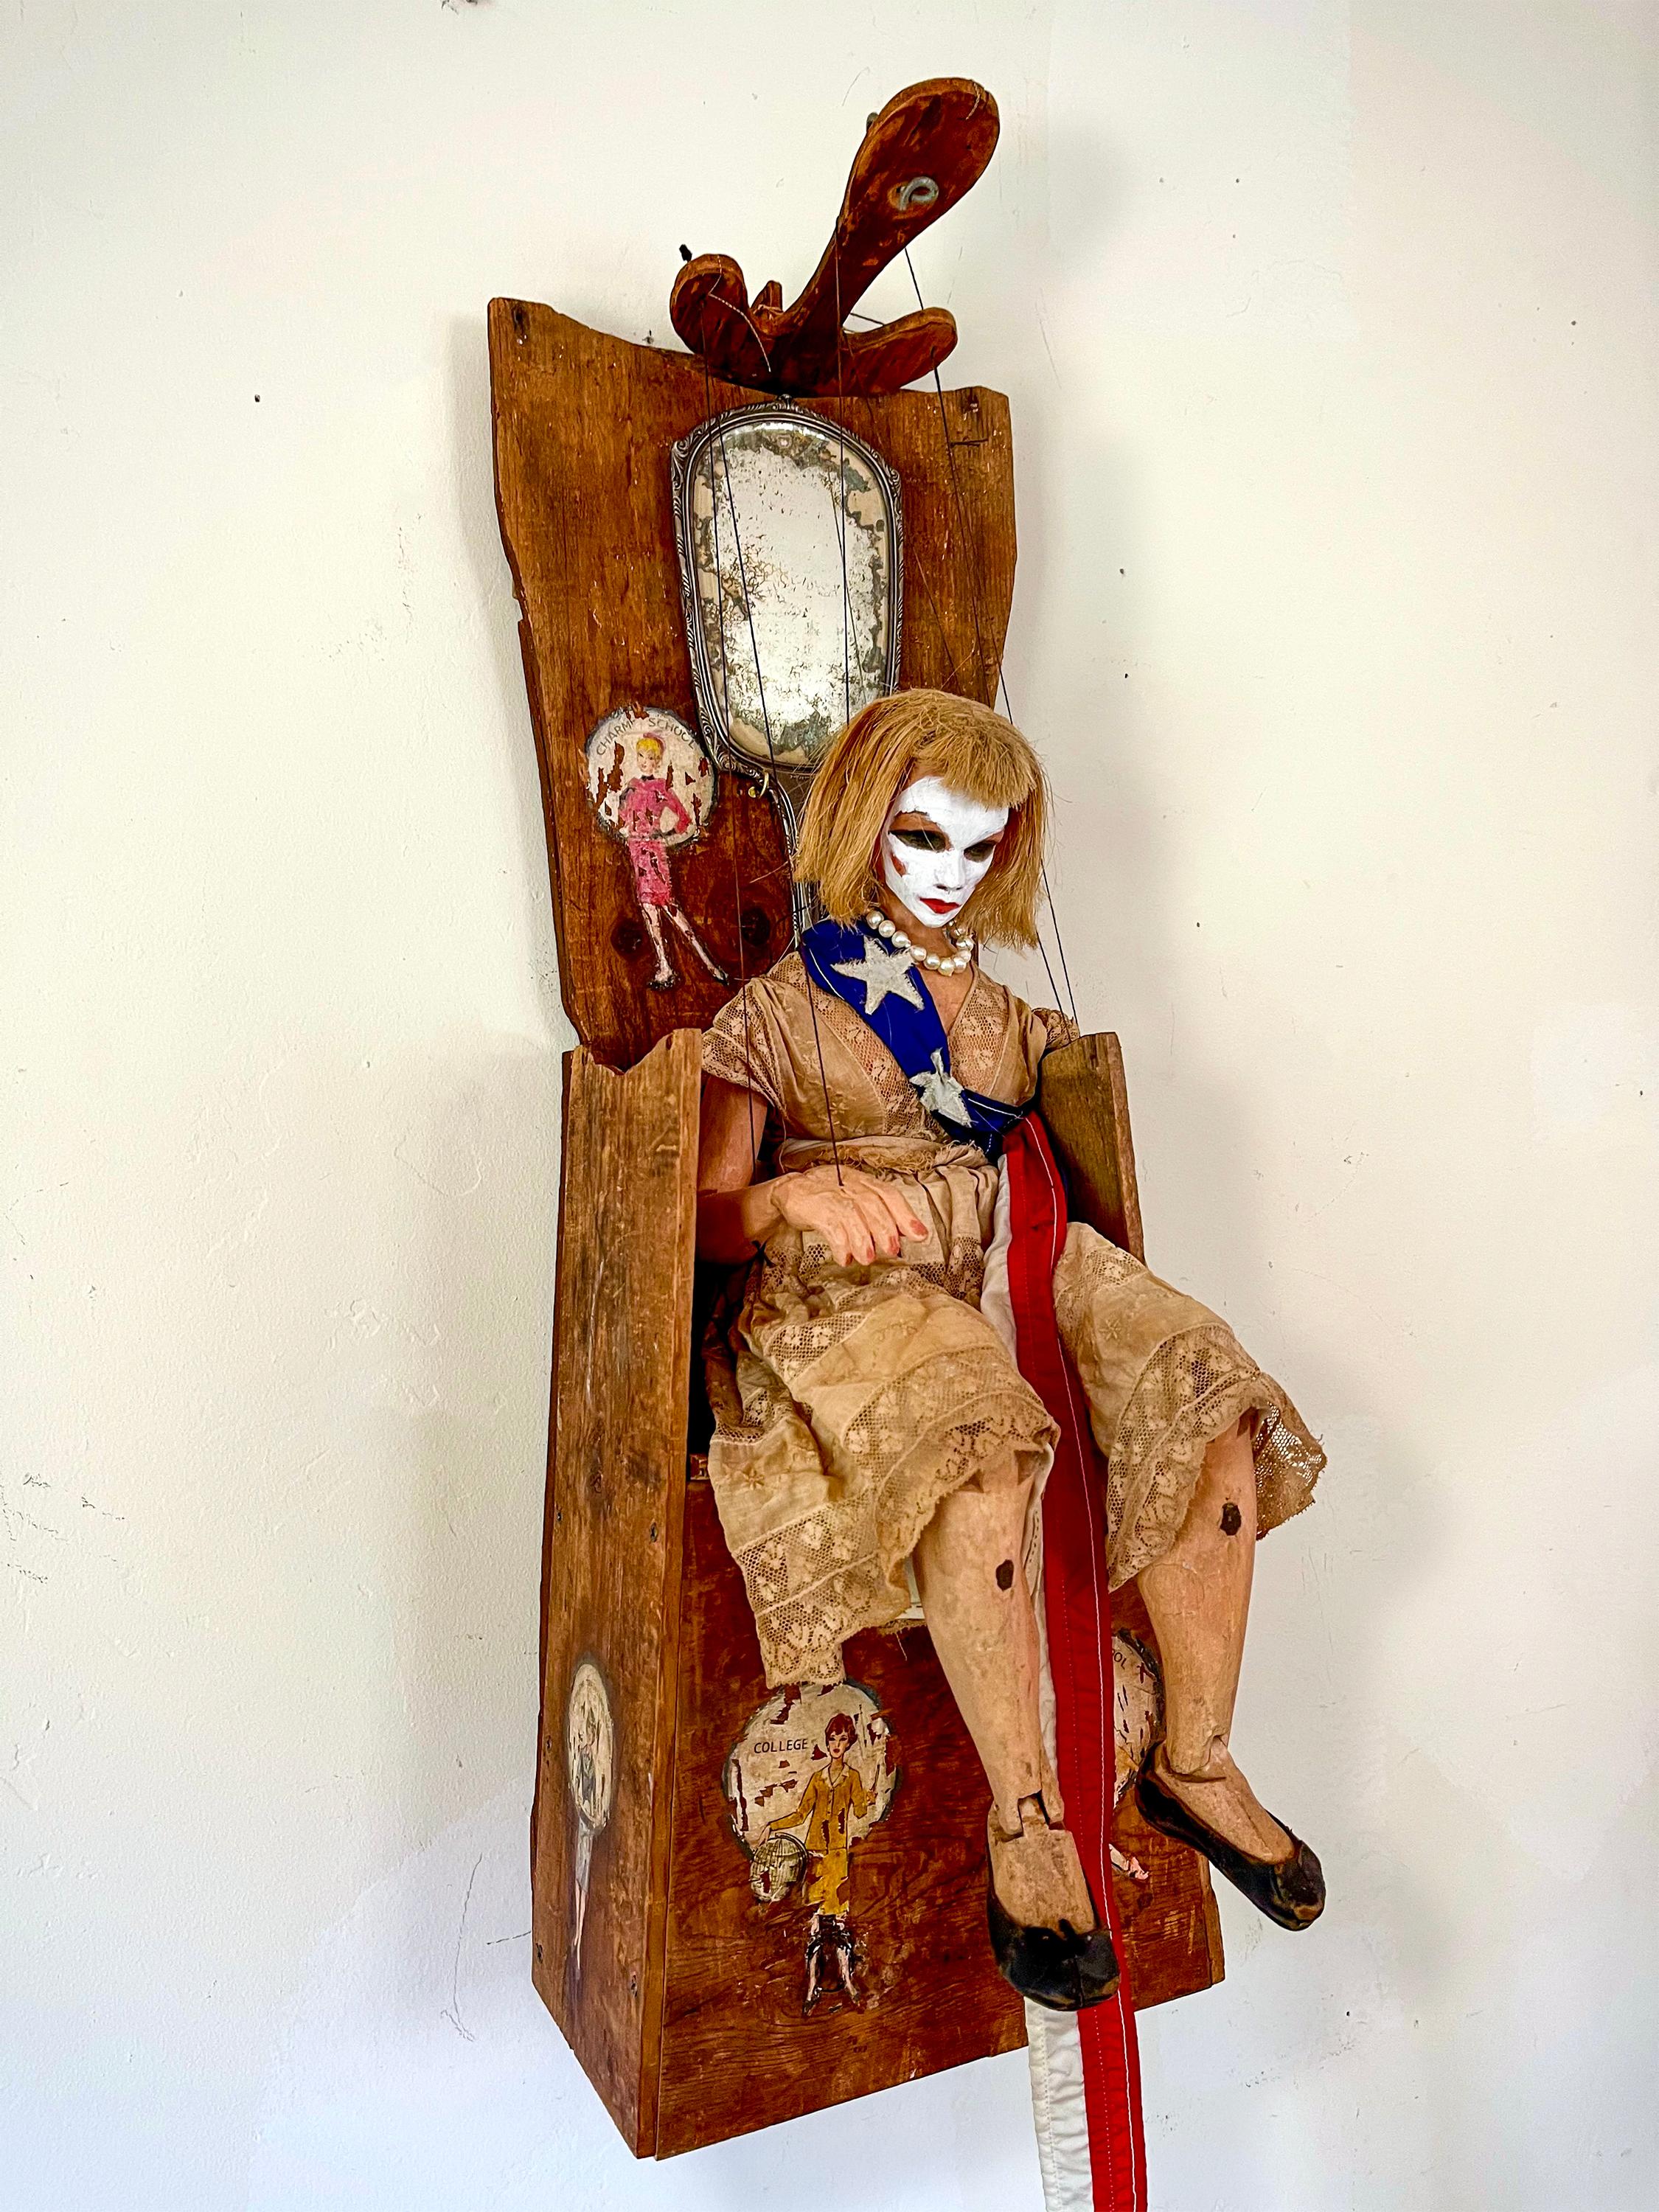 assemblage sculpture: Handmade old wood throne, hand carved wood puppet in old dress and boat flag sash, real pearls, vintage Rolex watch, probably fake, vintage painted pictures girls' career game pieces, handmade wood controller, antique sterling